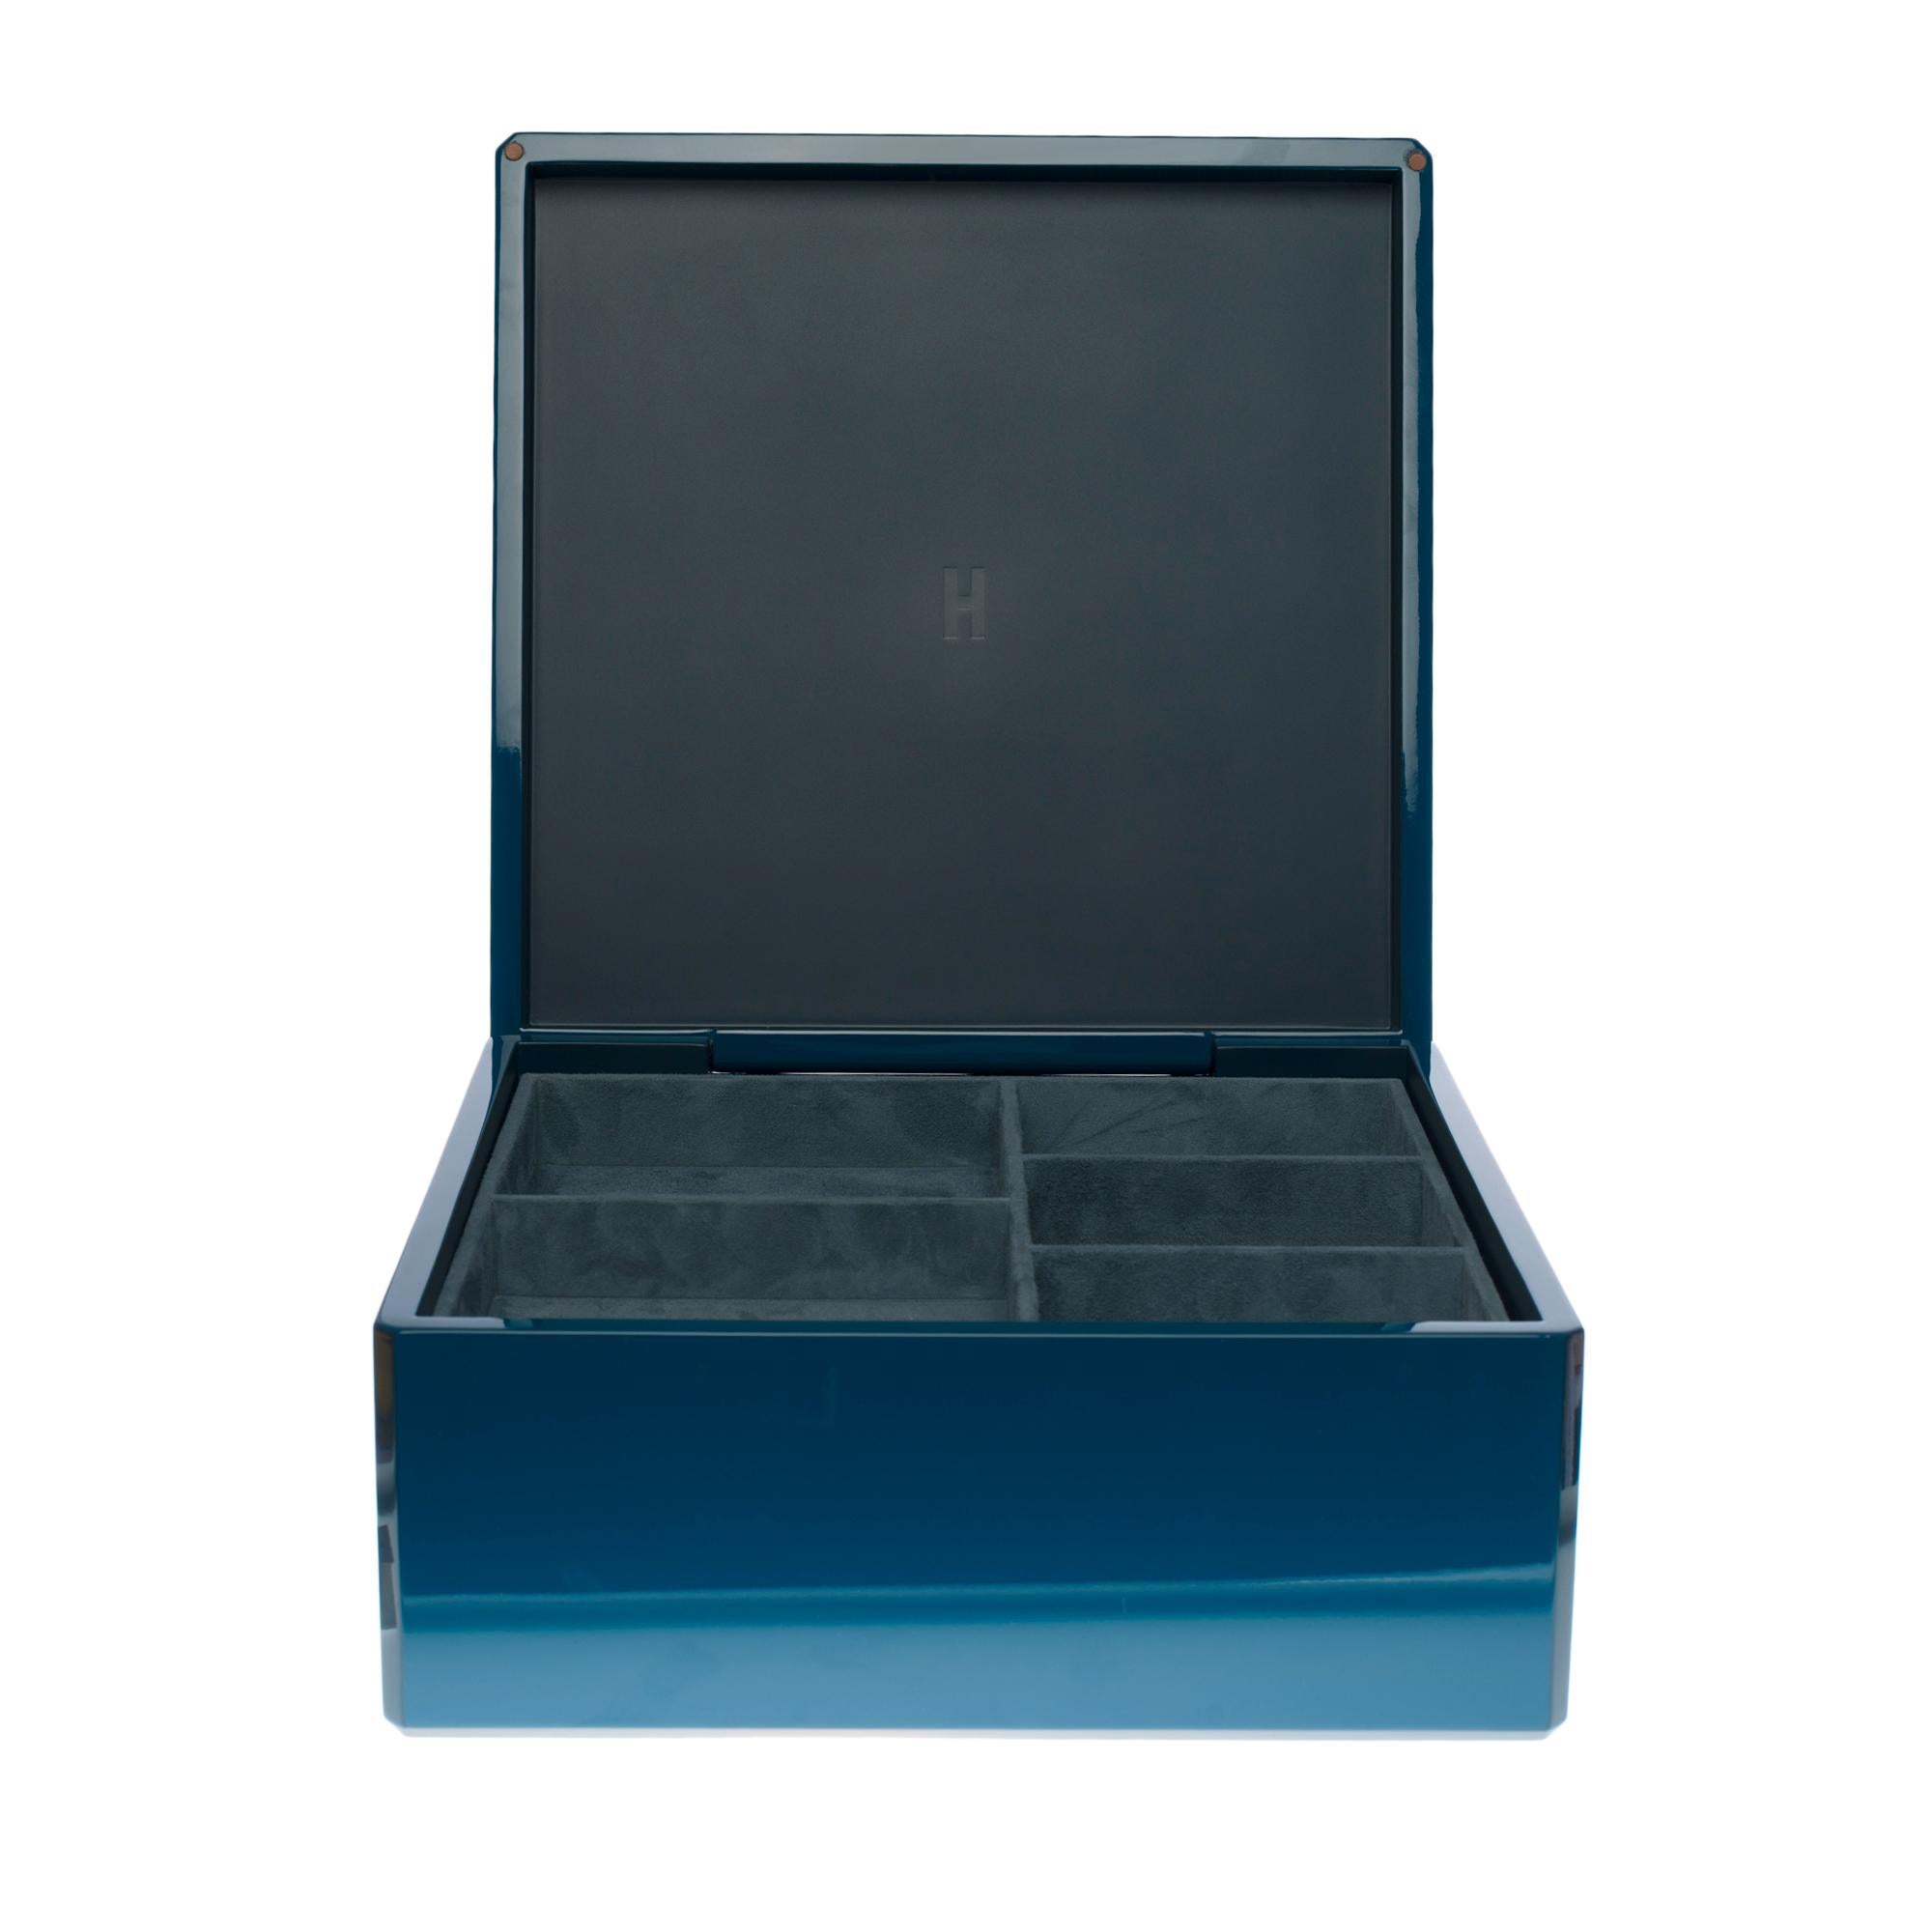 Women's or Men's Brand New- Beautiful Hermès jewelry and accessories case in blue laquered wood